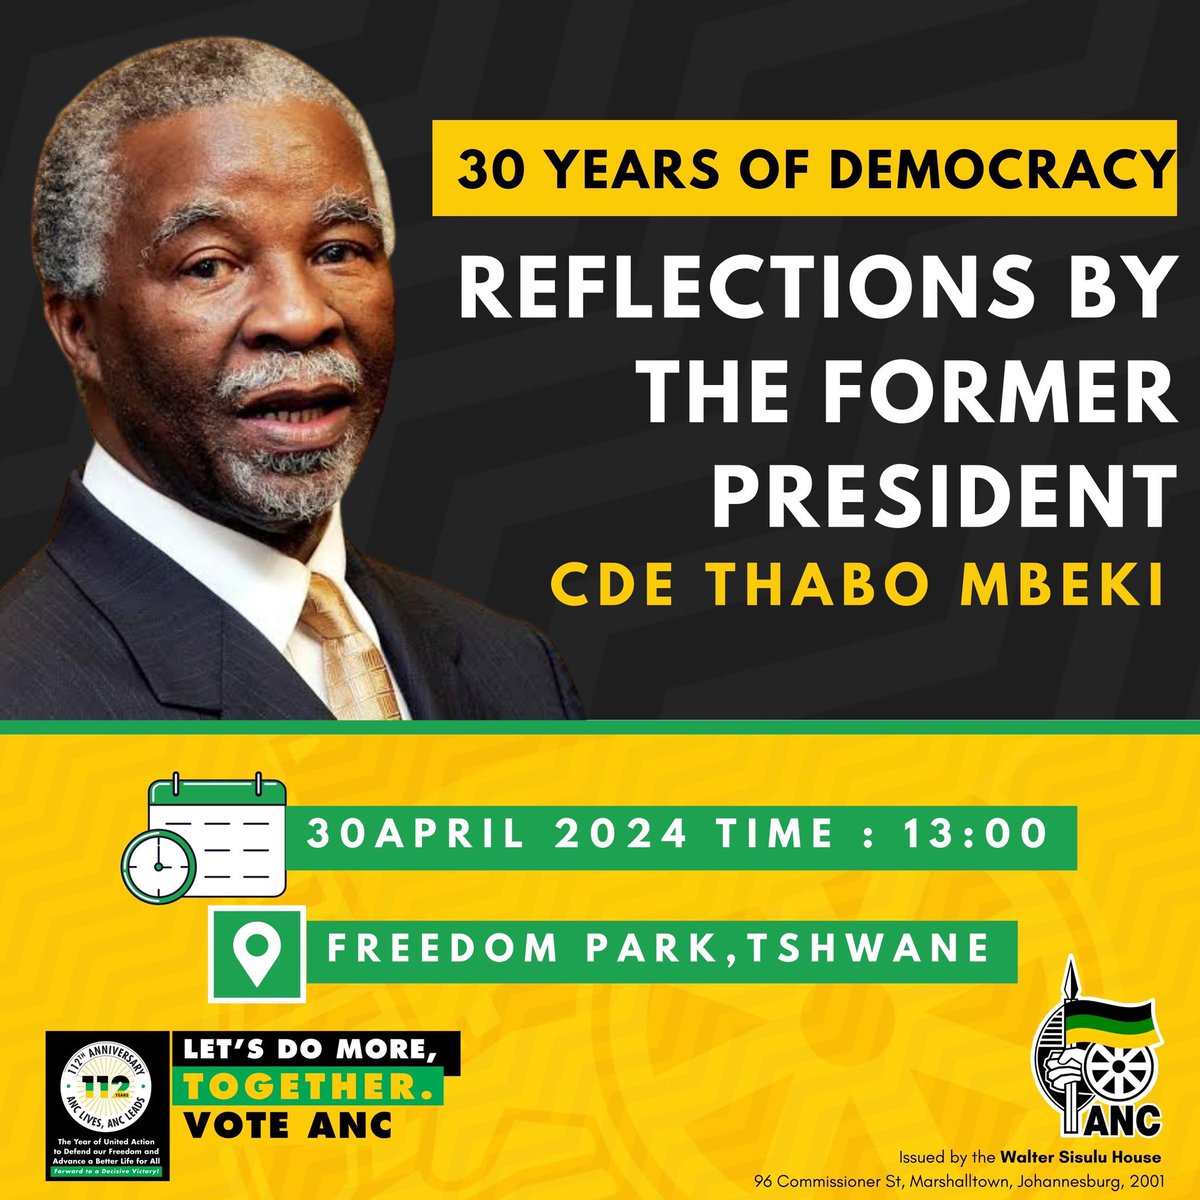 The ANC in Gauteng invites members of the public and ANC members to Freedom Park as President Thabo Mbeki will be giving an address on the reflections of 30 Years of Democracy #LetsDoMoreTogether #VoteANC